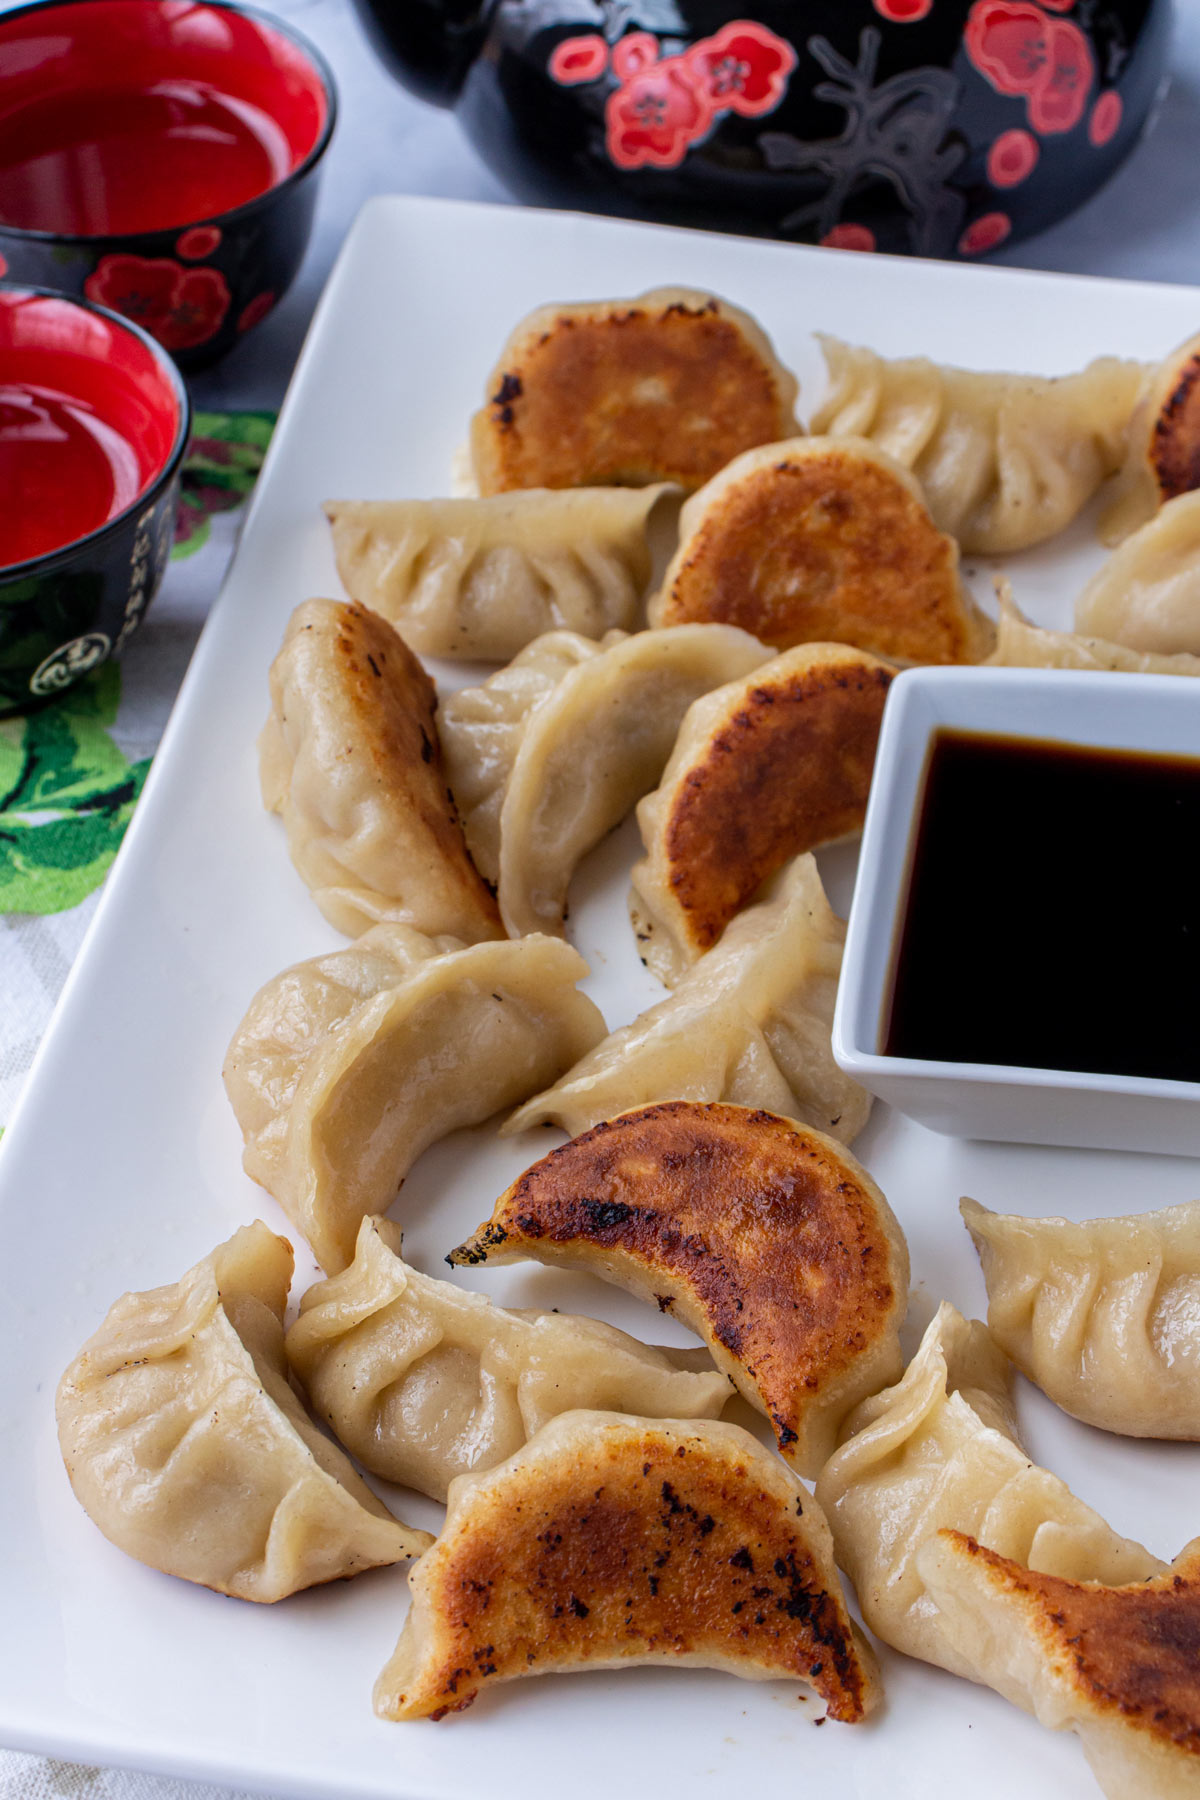 A platter of pan-fried Chinese dumplings with some upside down to show their crispy bottoms.